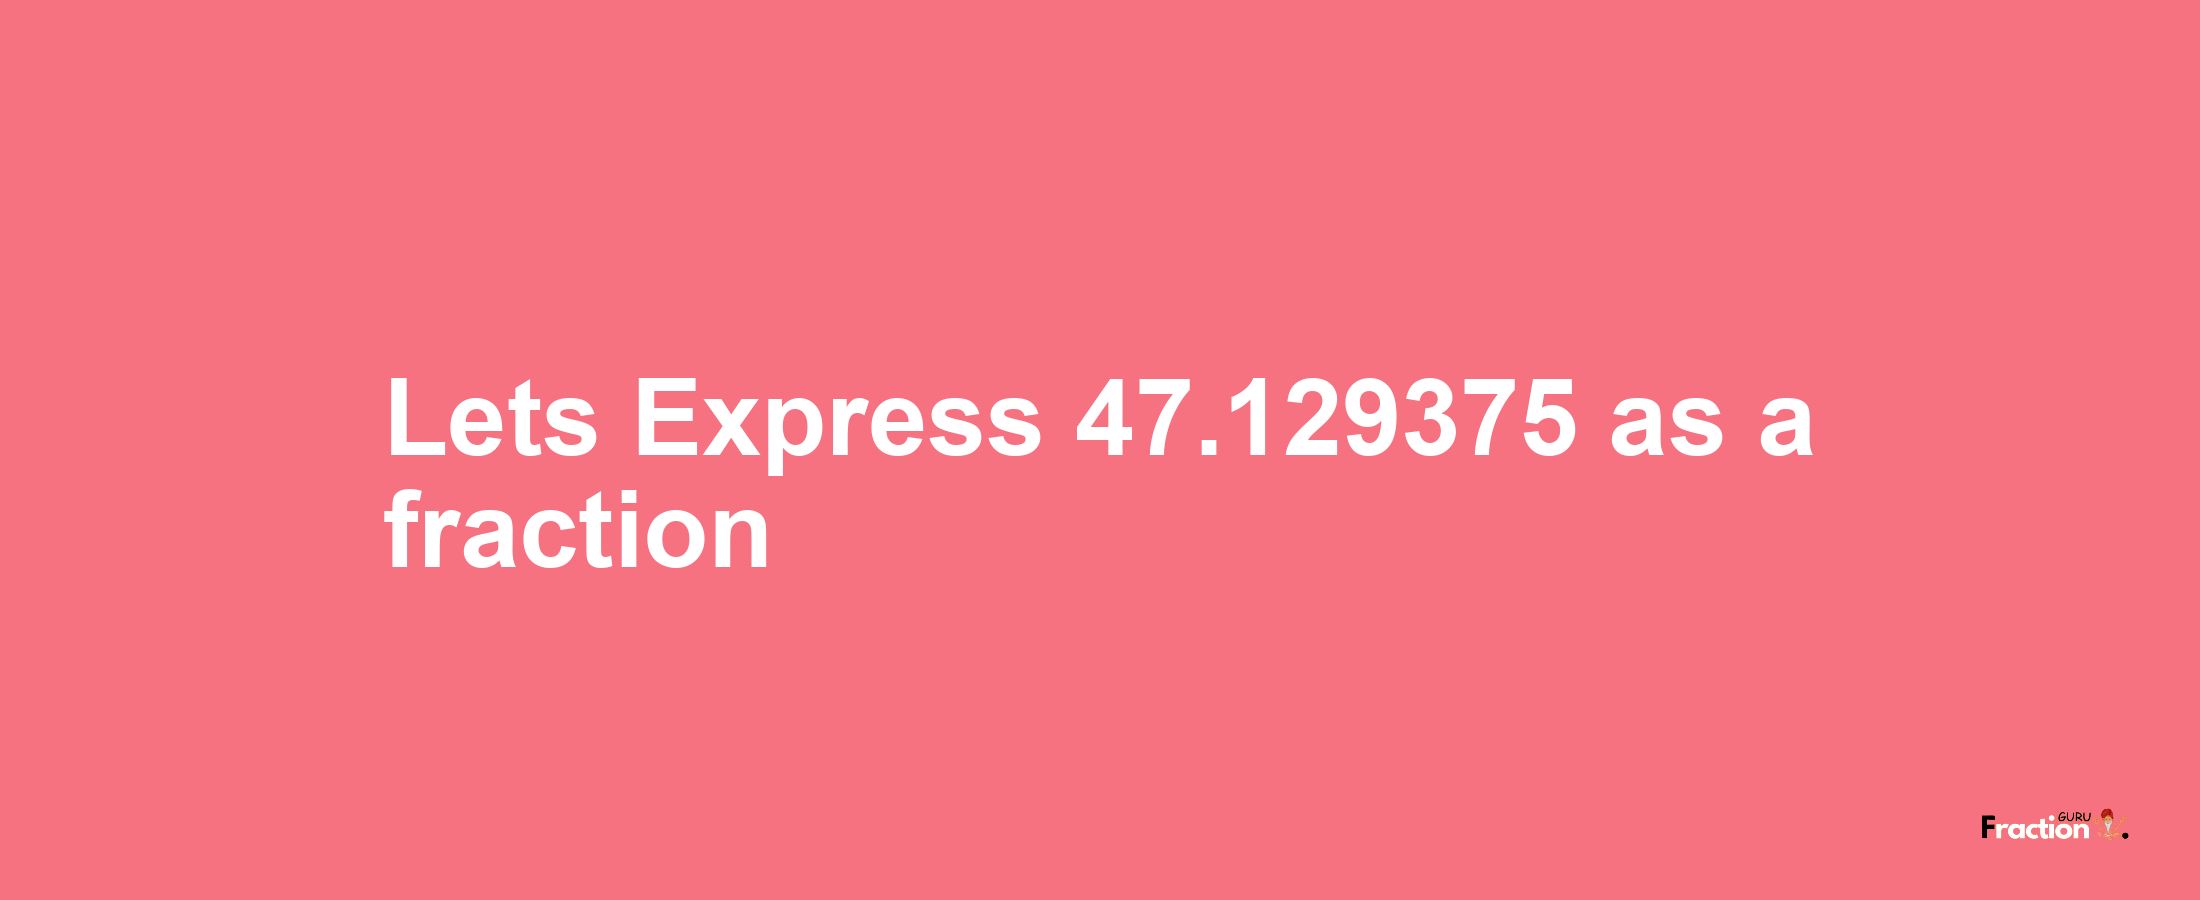 Lets Express 47.129375 as afraction